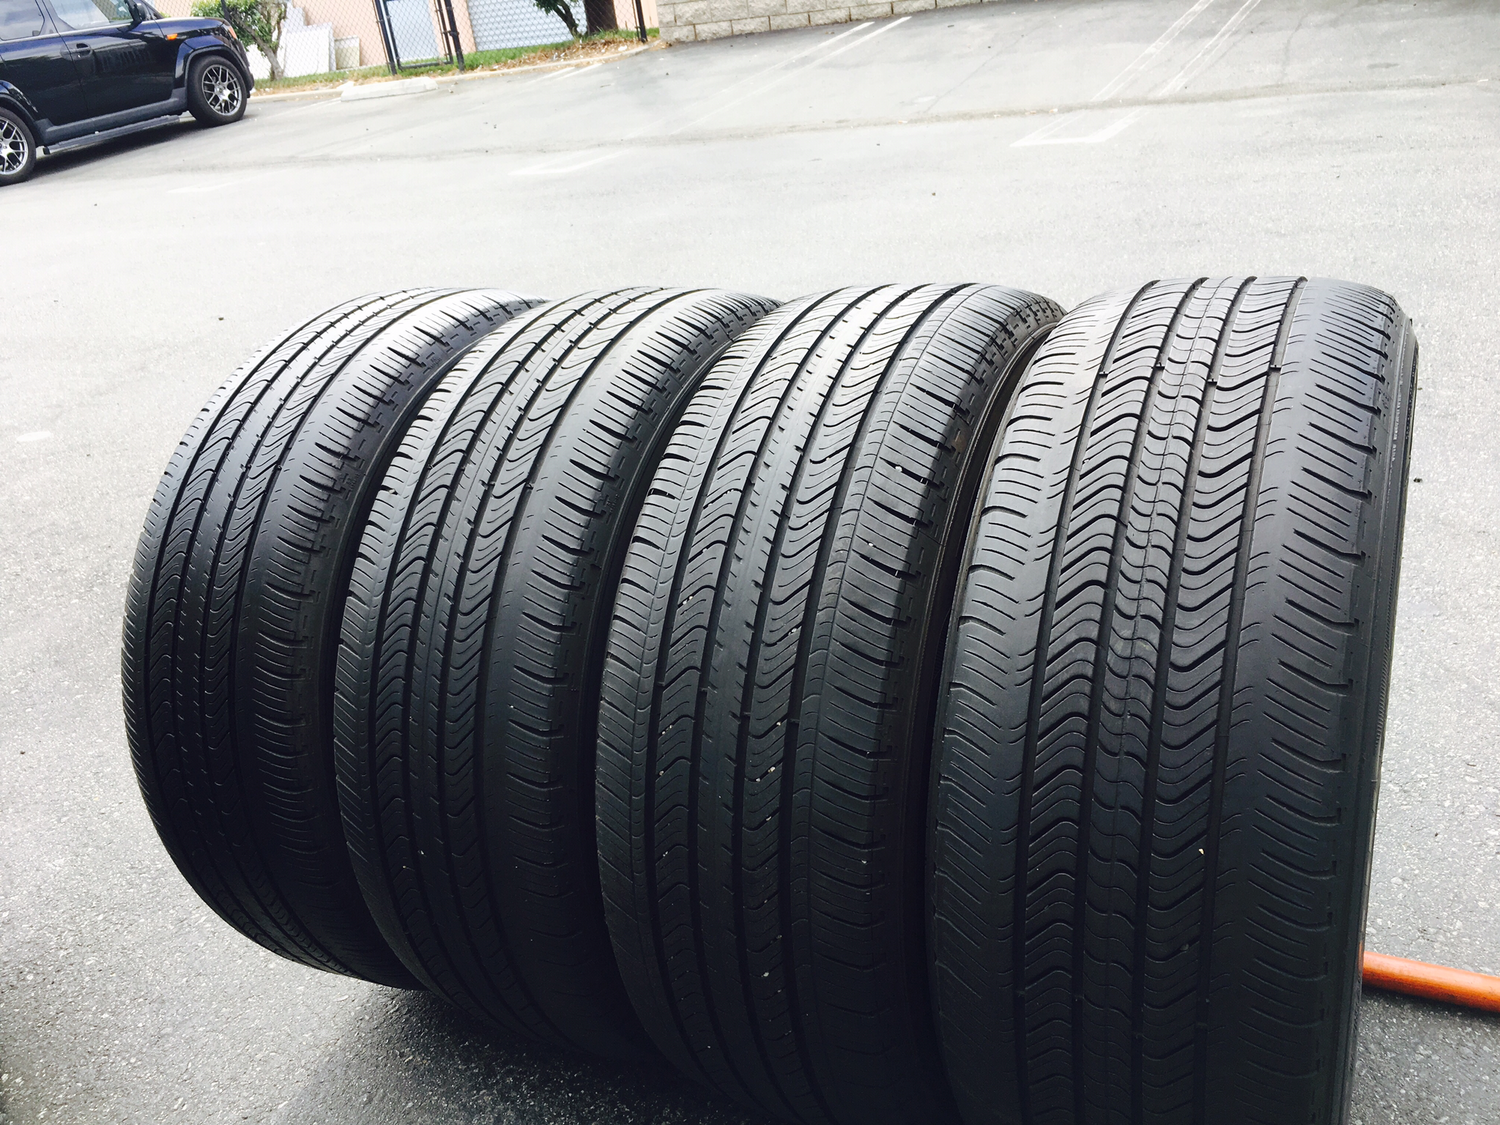 4 USED TIRES 215/55r17 Michelin PRIMACY MXV4 WITH 60% TREAD LIFE